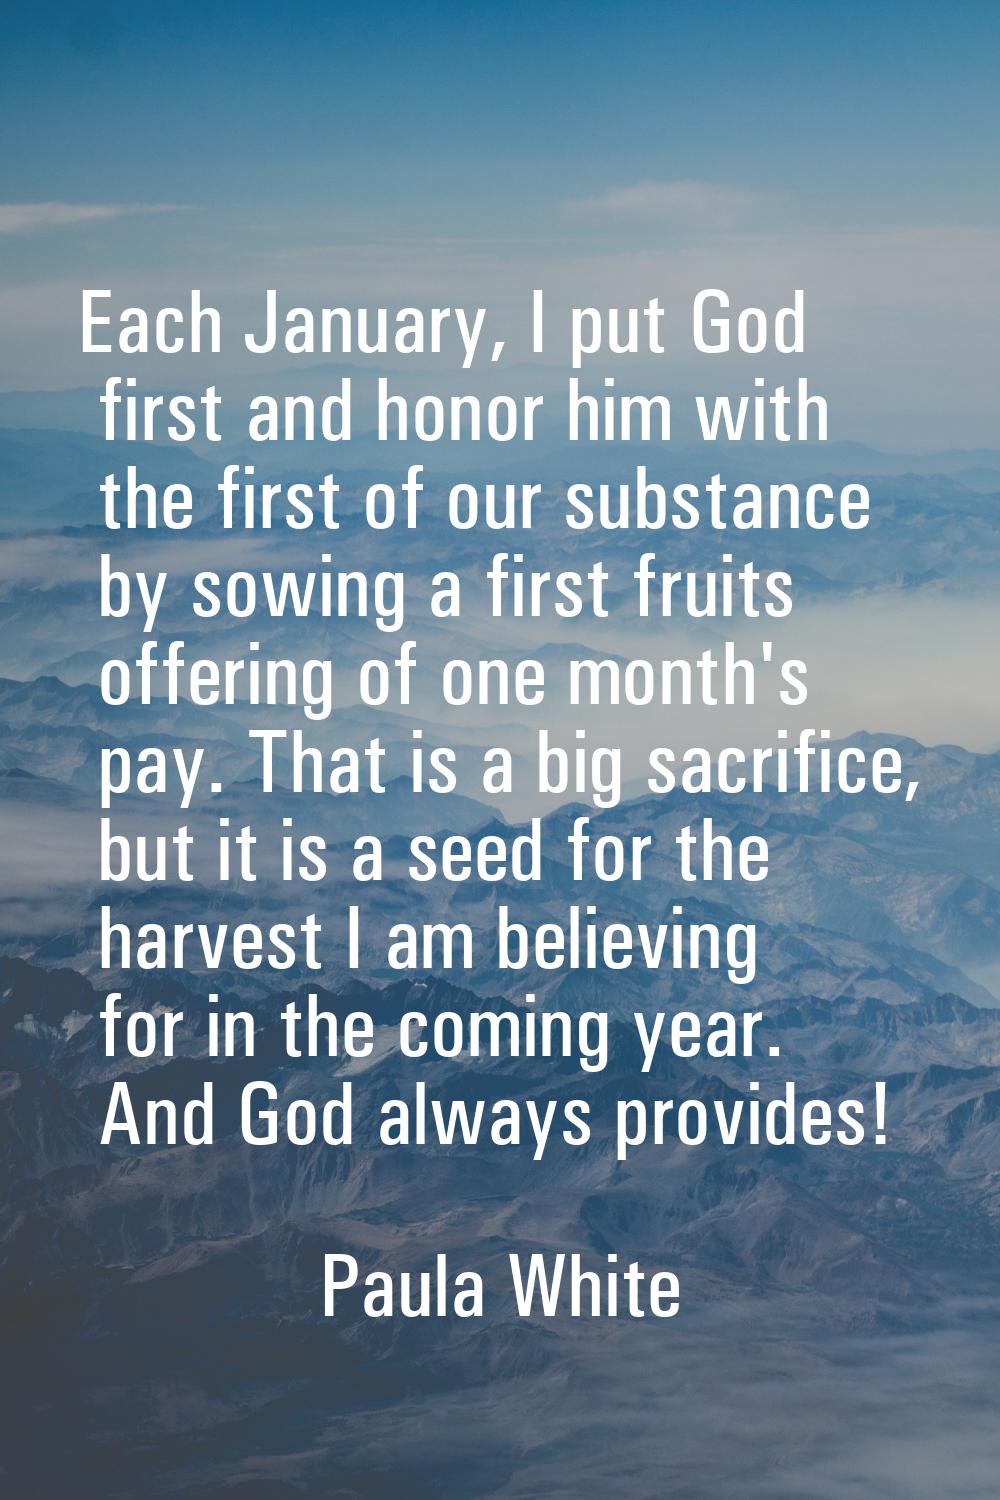 Each January, I put God first and honor him with the first of our substance by sowing a first fruit